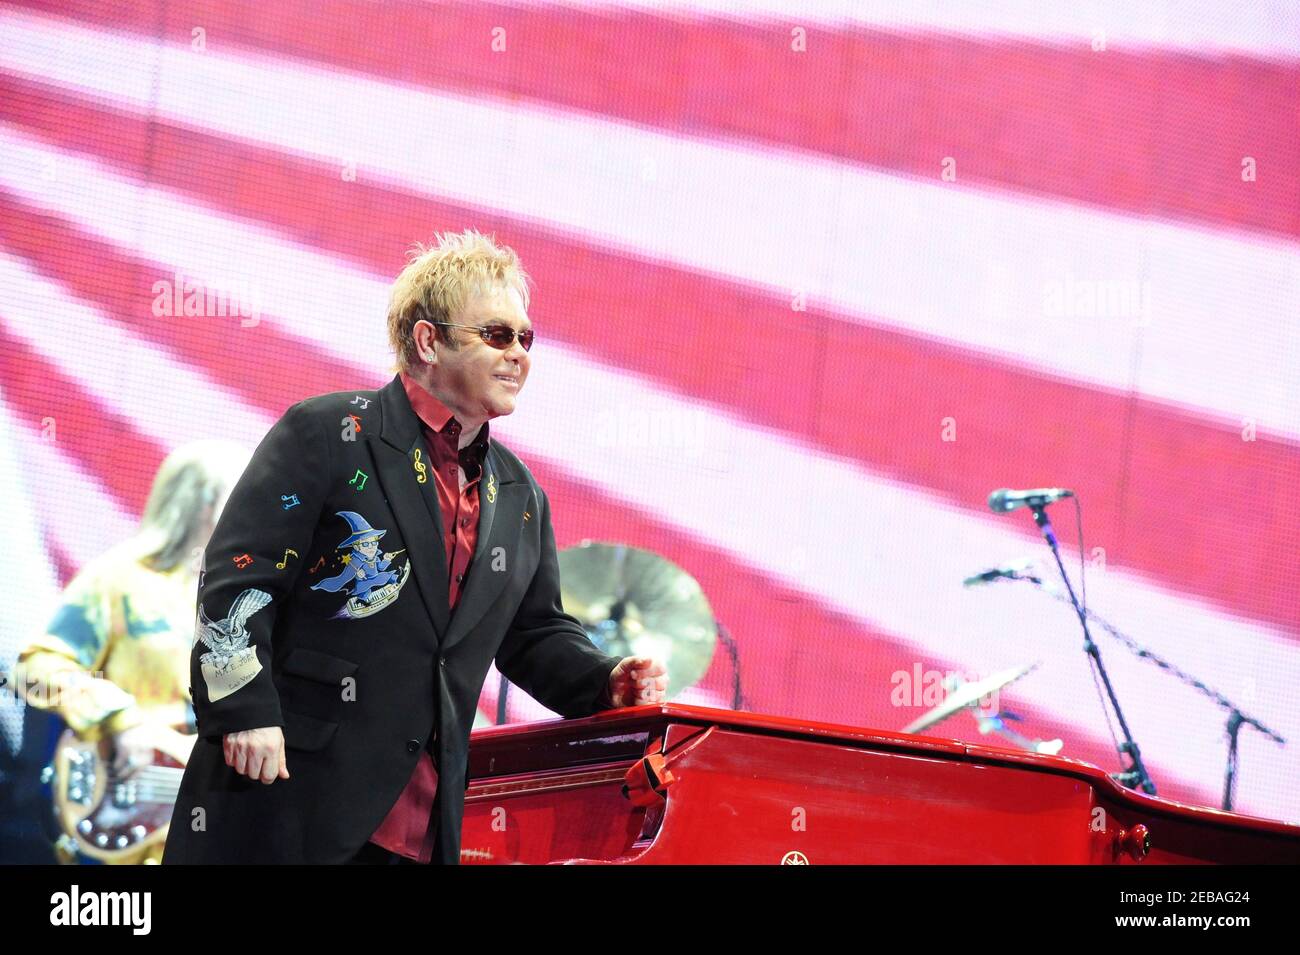 The Red Piano was a concert tour by English singer-songwriter Sir Elton John. The idea for the show originated in 2004 by Elton John and David LaChapelle Stock Photo